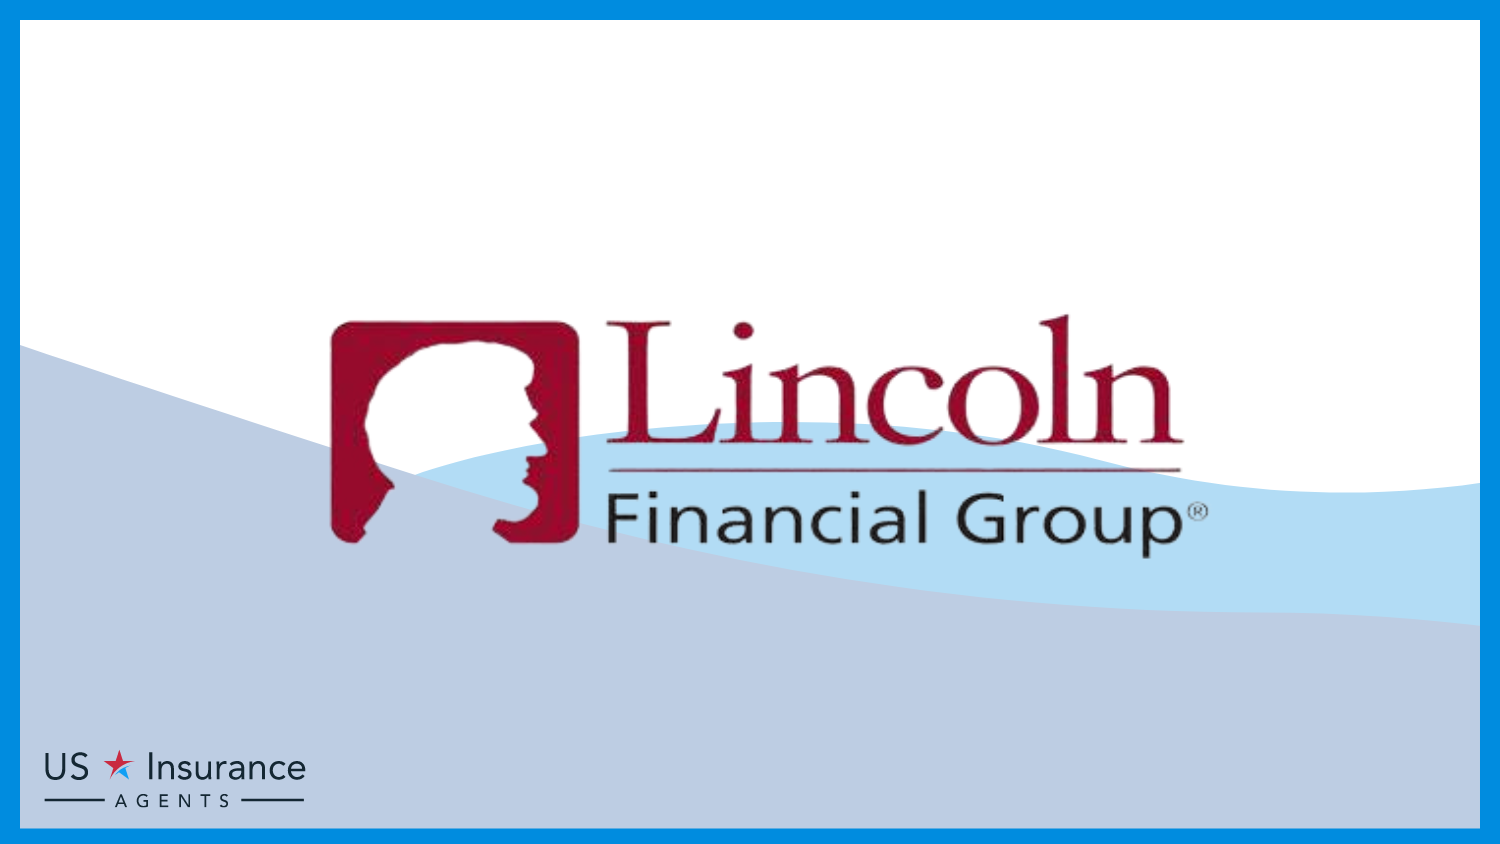 Lincoln Financial Group: Best Life Insurance for Kidney Transplant Patients